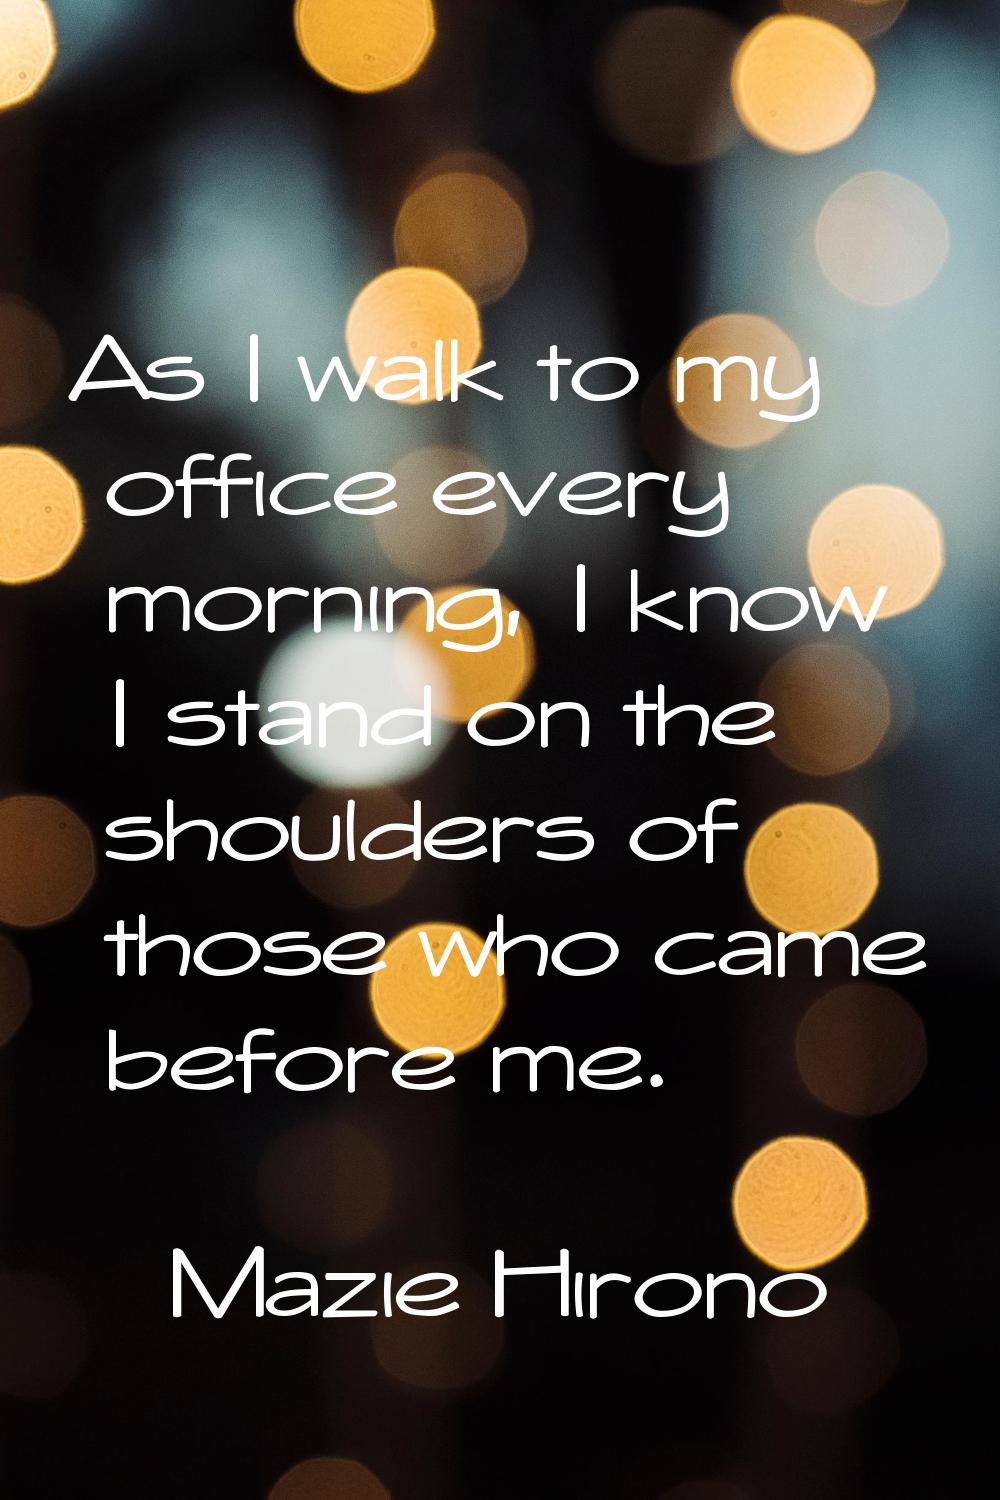 As I walk to my office every morning, I know I stand on the shoulders of those who came before me.